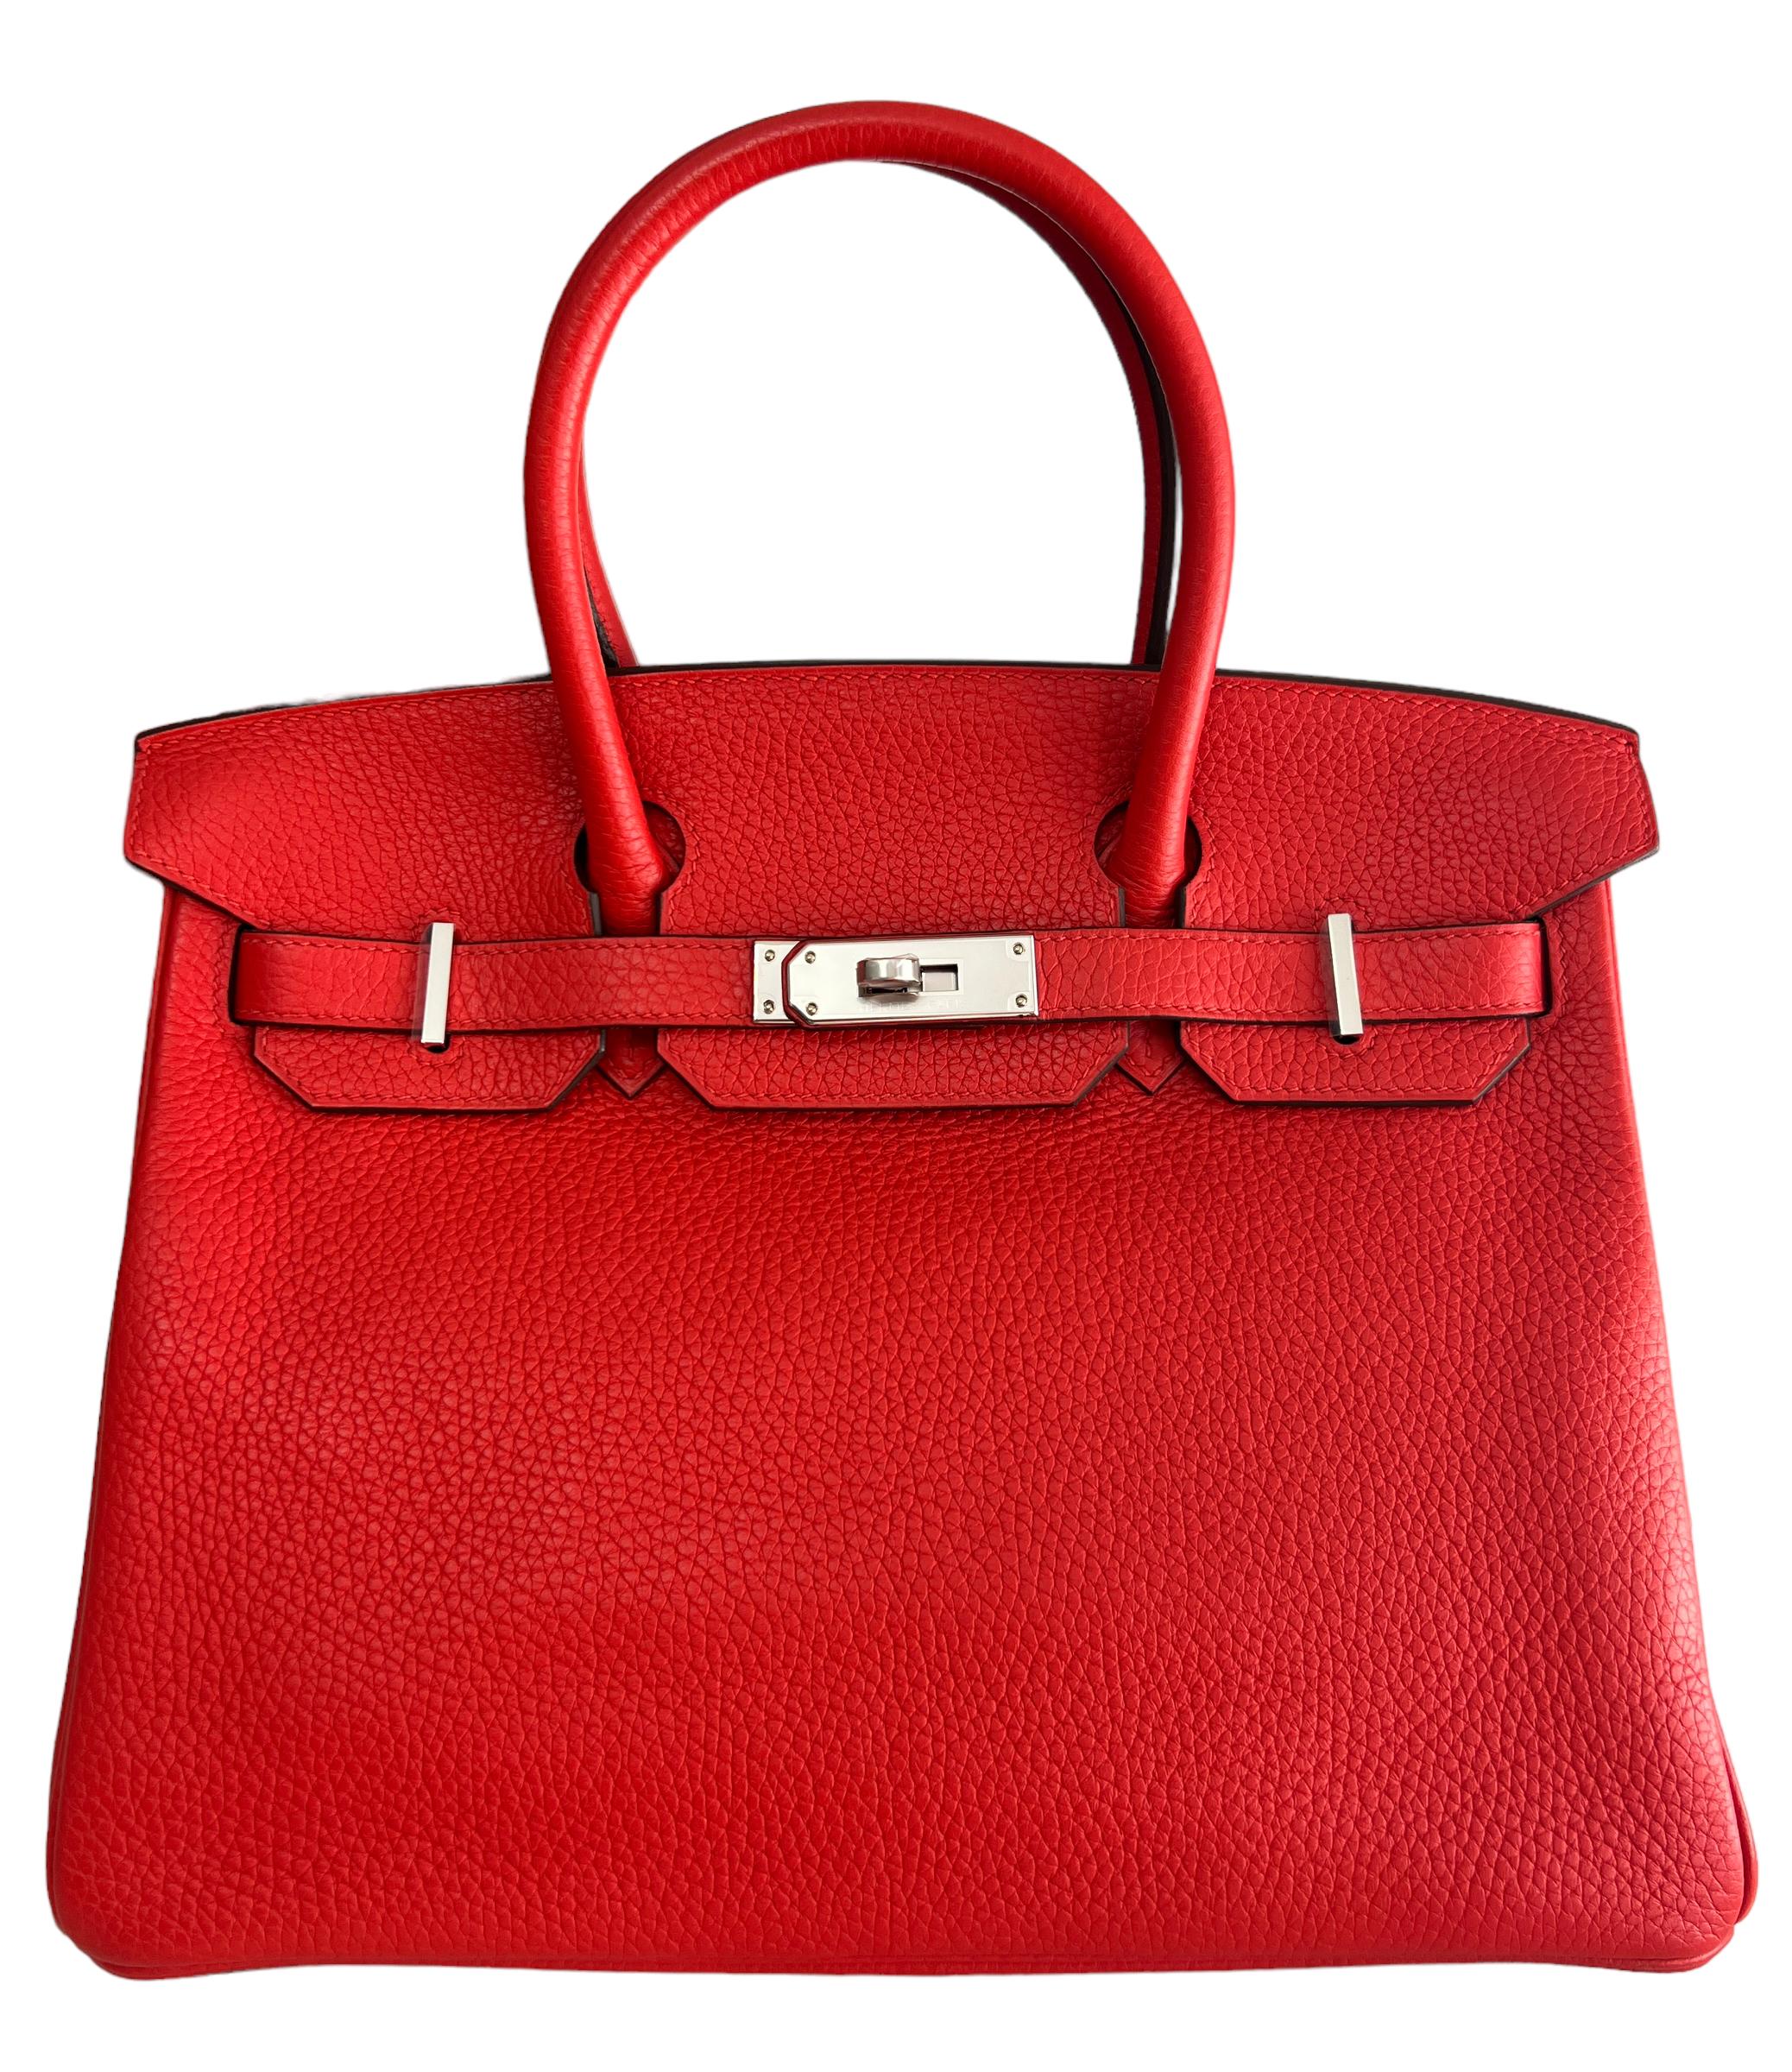 Like New Stunning Hermes Birkin 30  Verso Rouge Tomate Red Naturel Sabel Interior Leather Complimented by Palladium Hardware. D Stamp 2019. As New Condition with Plastic hardware. 

Please Note, the bag has minor indentations on the bottom inside of